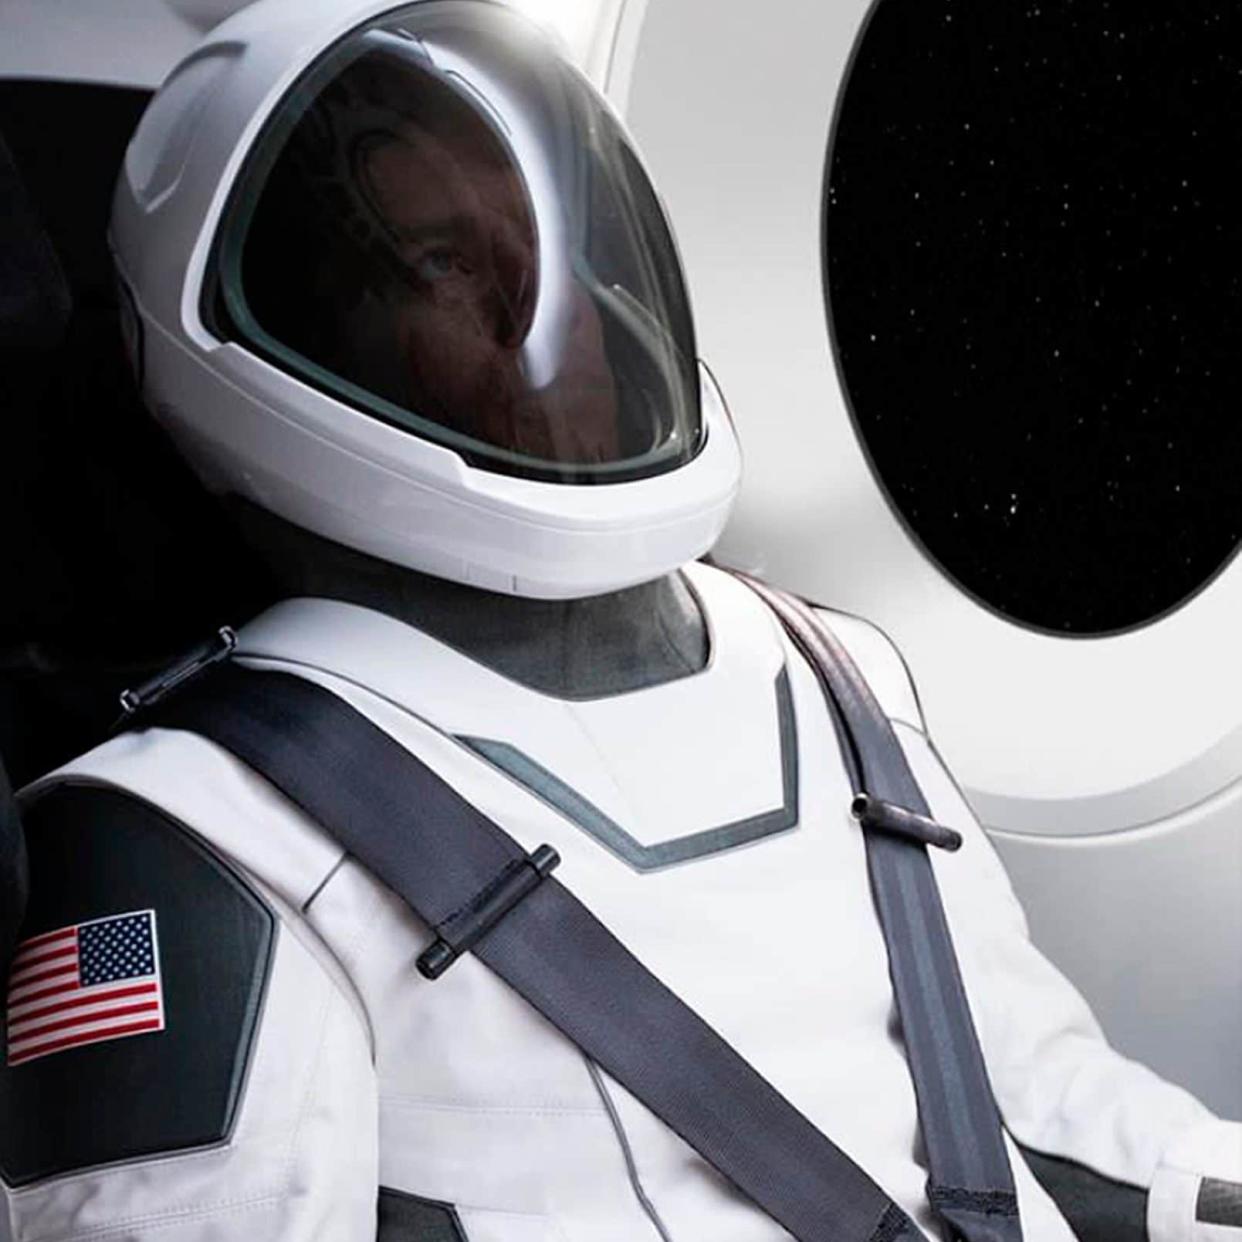 This undated image made available by Elon Musk on Wednesday, Aug. 23, 2017 shows a new spacesuit from his company SpaceX. It's designed for its crewed flights planned for 2018 - SpaceX